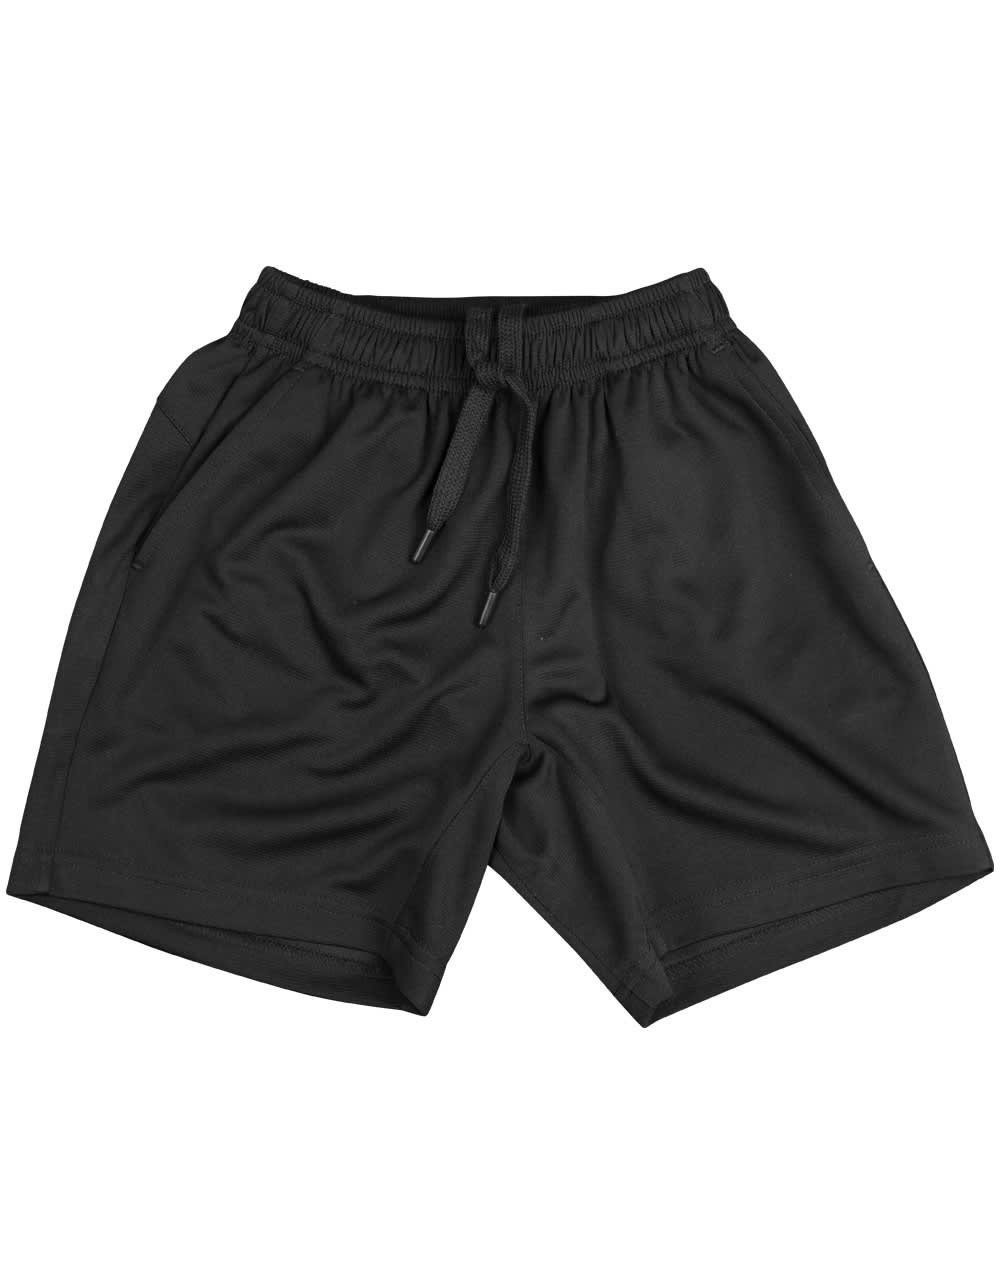 Adult's Bamboo Charcoal Sports Shorts SS05 | Black